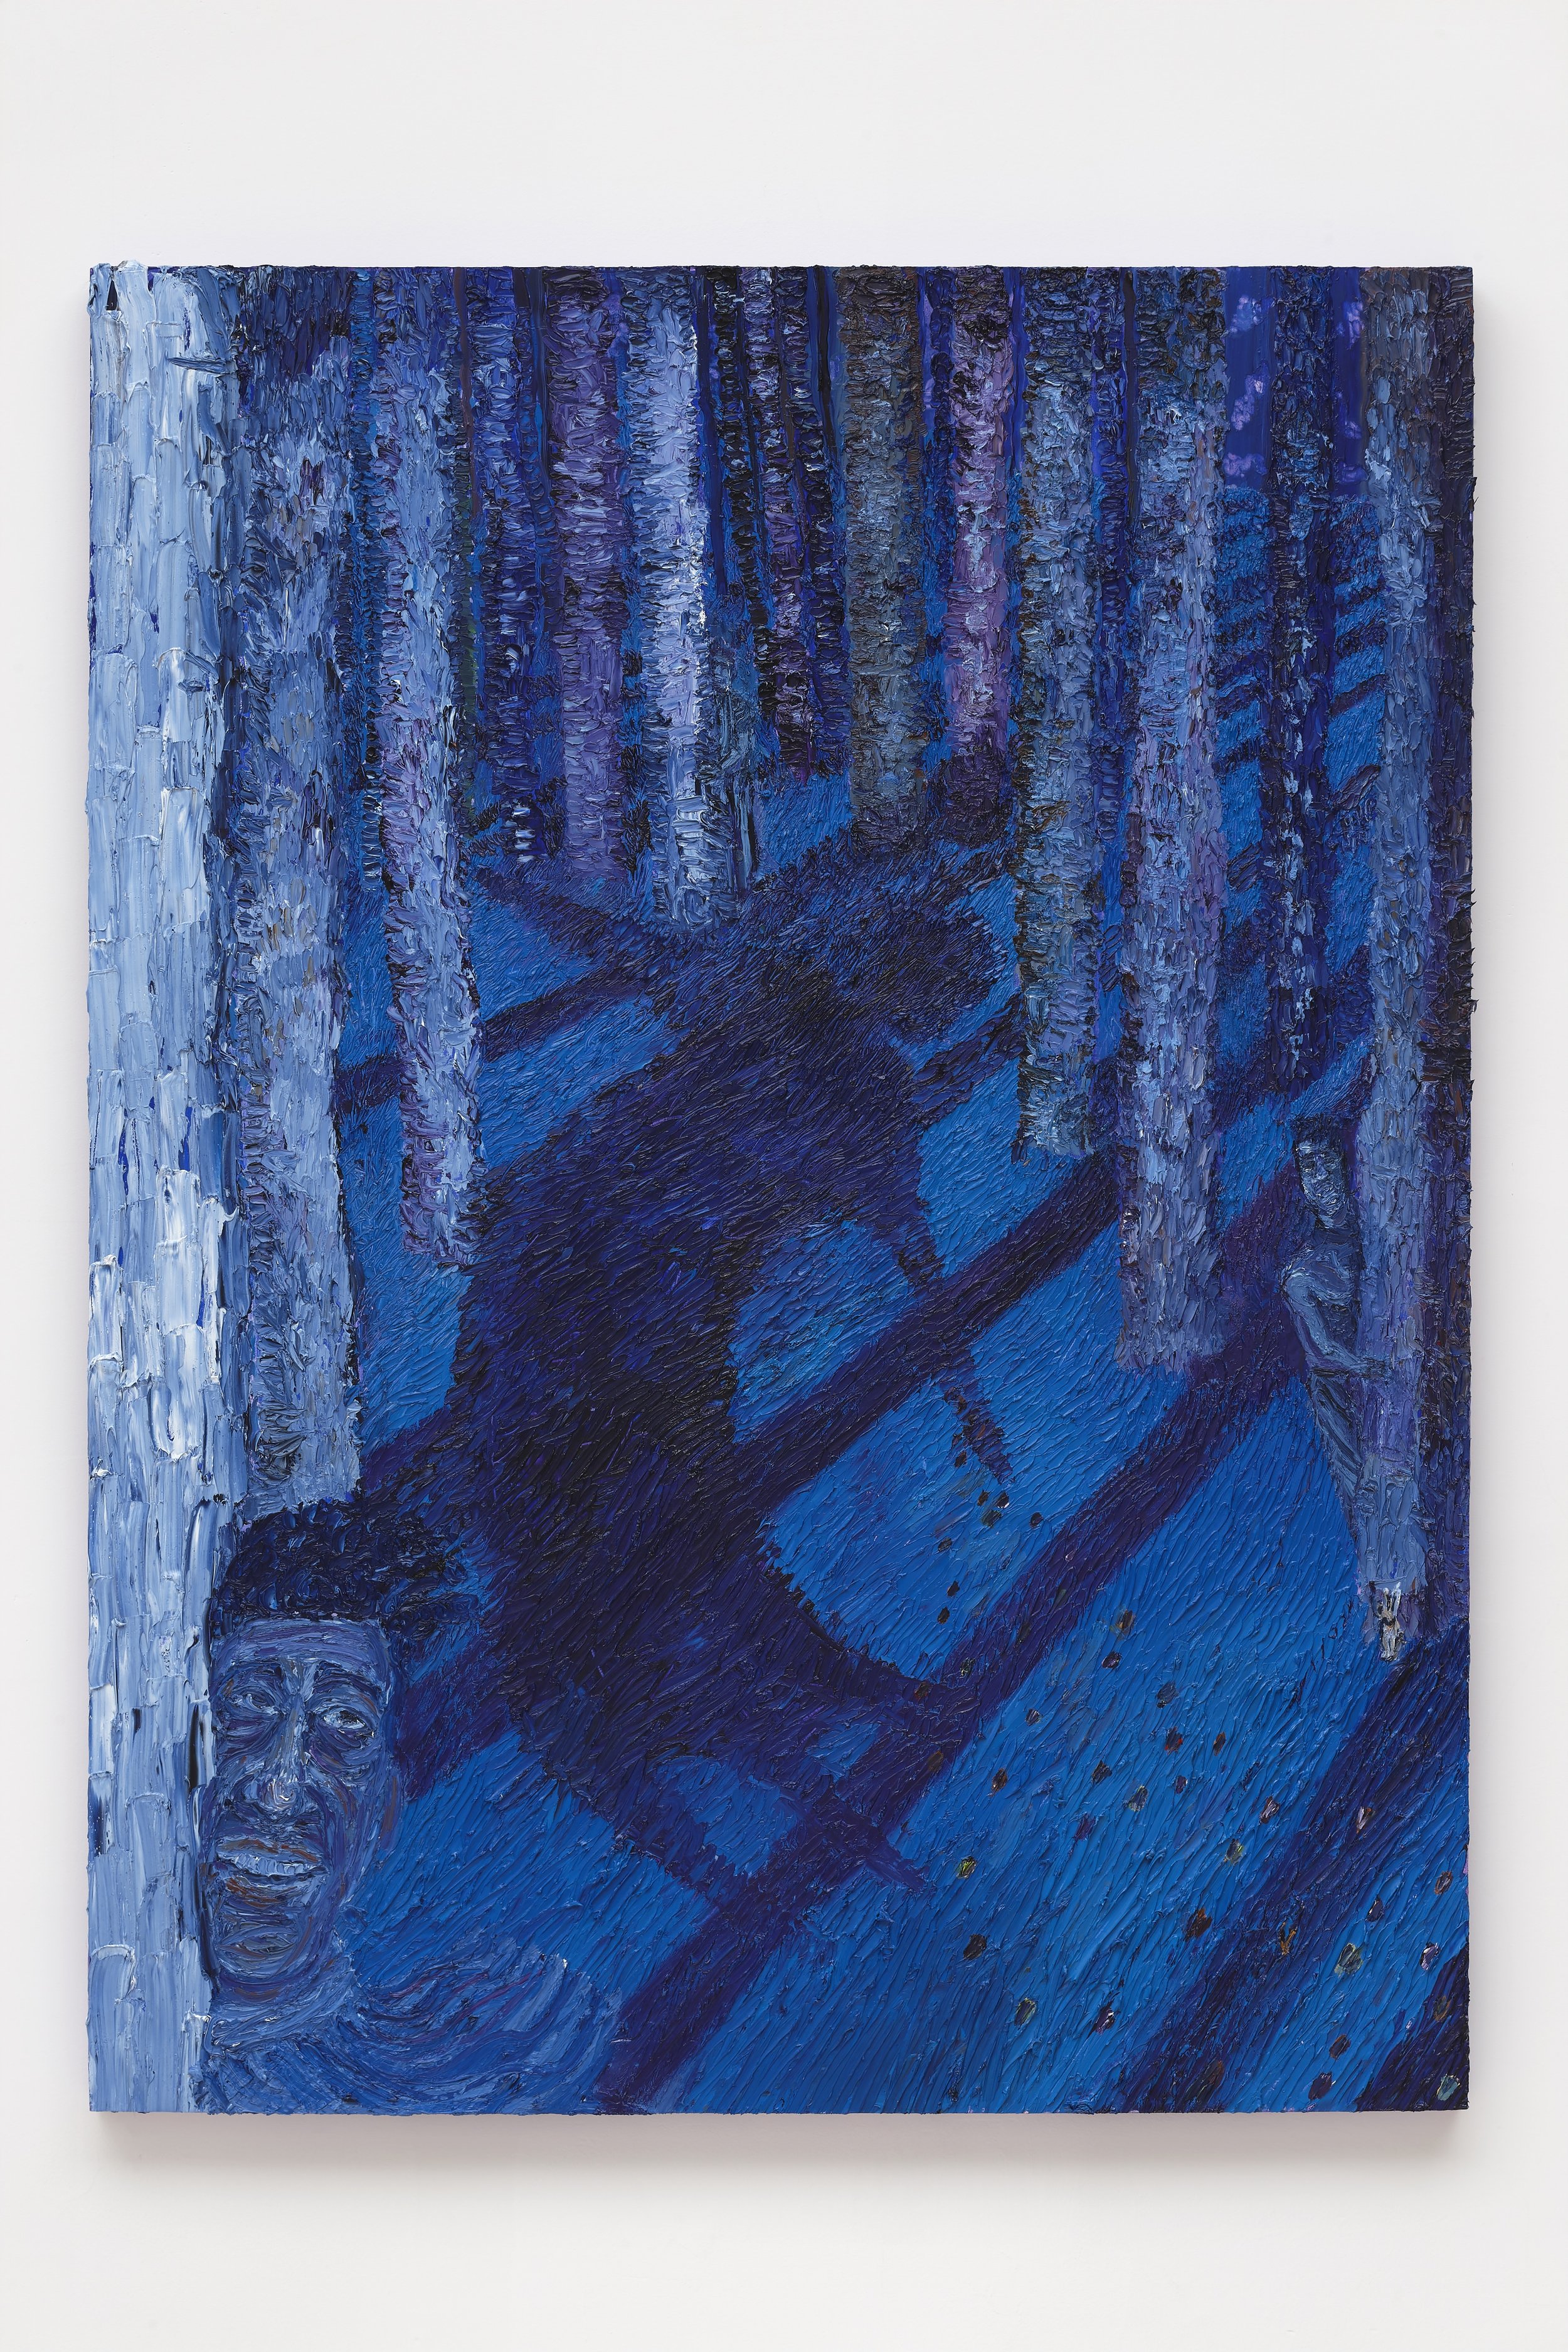 We Were Hiding and Seeking, 2022 oil-on-panel 48h x 36w inches, 1969gallery.jpg